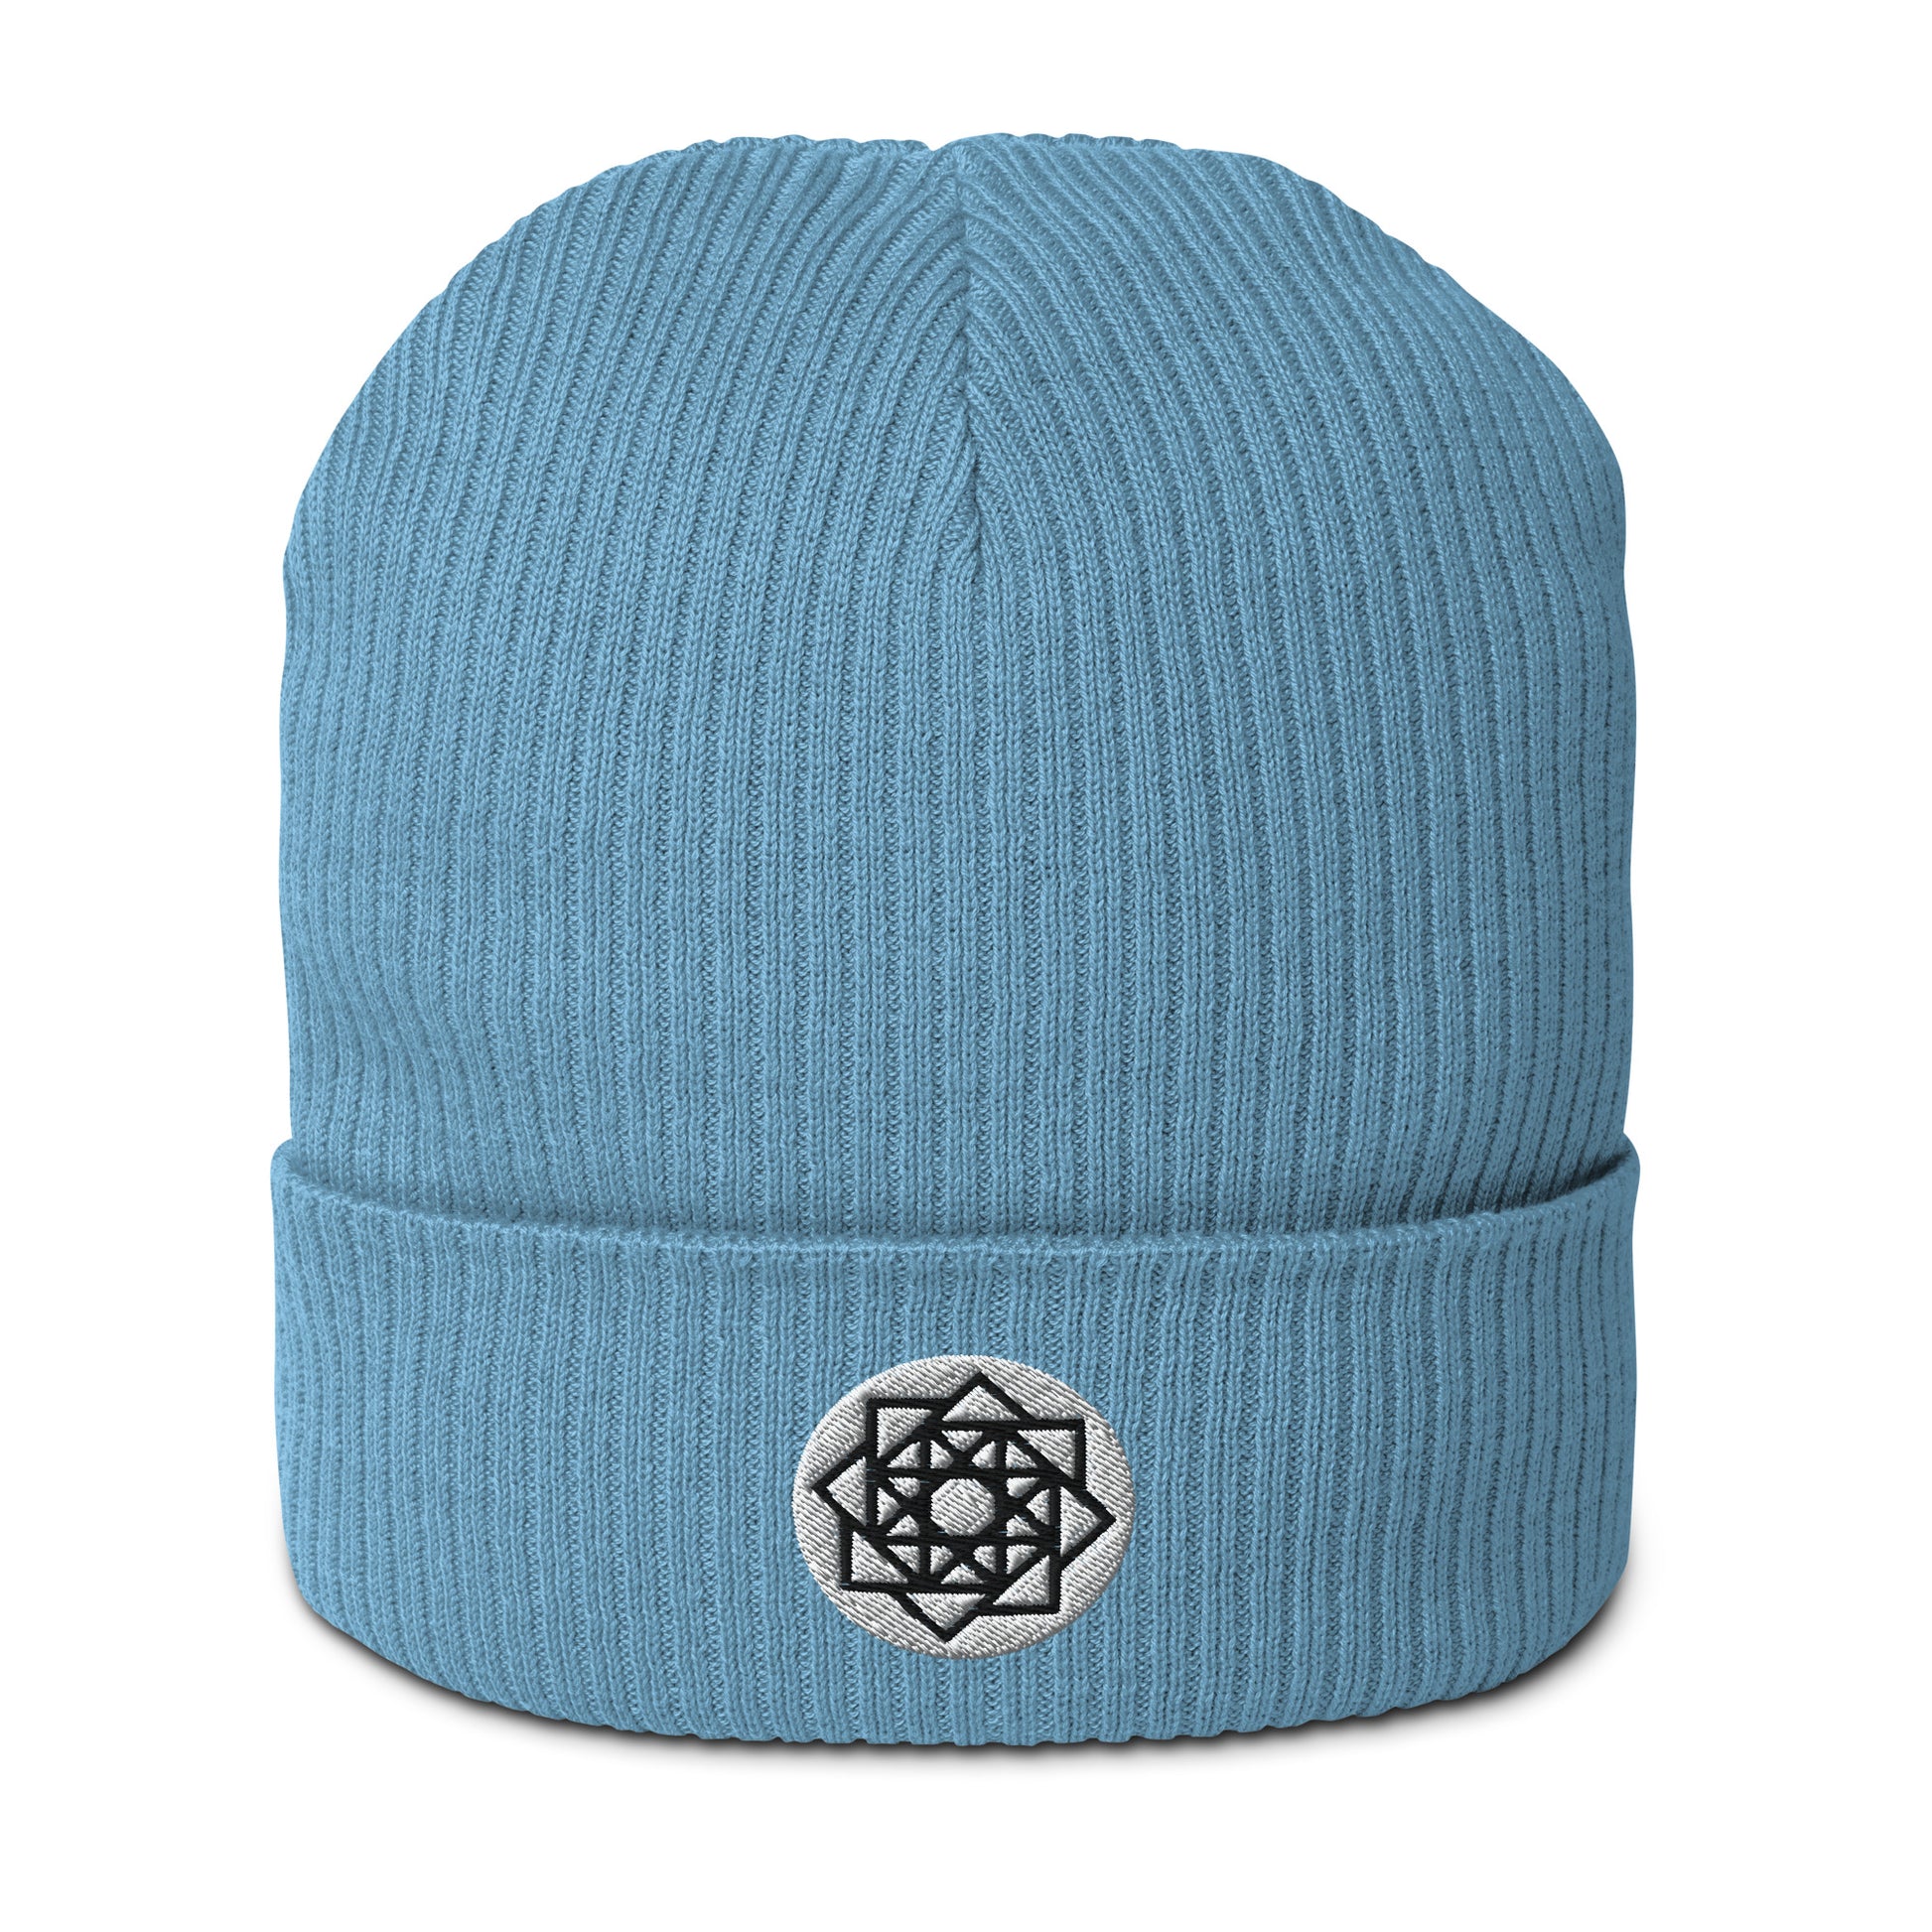 Allow me to introduce our Square Matrix Beanie in Bermuda Blue, a testament to cosmic order and mathematical elegance. Woven from the finest organic cotton and adorned with the precise geometry of the Square Matrix symbol, this beanie transcends mere headwear.